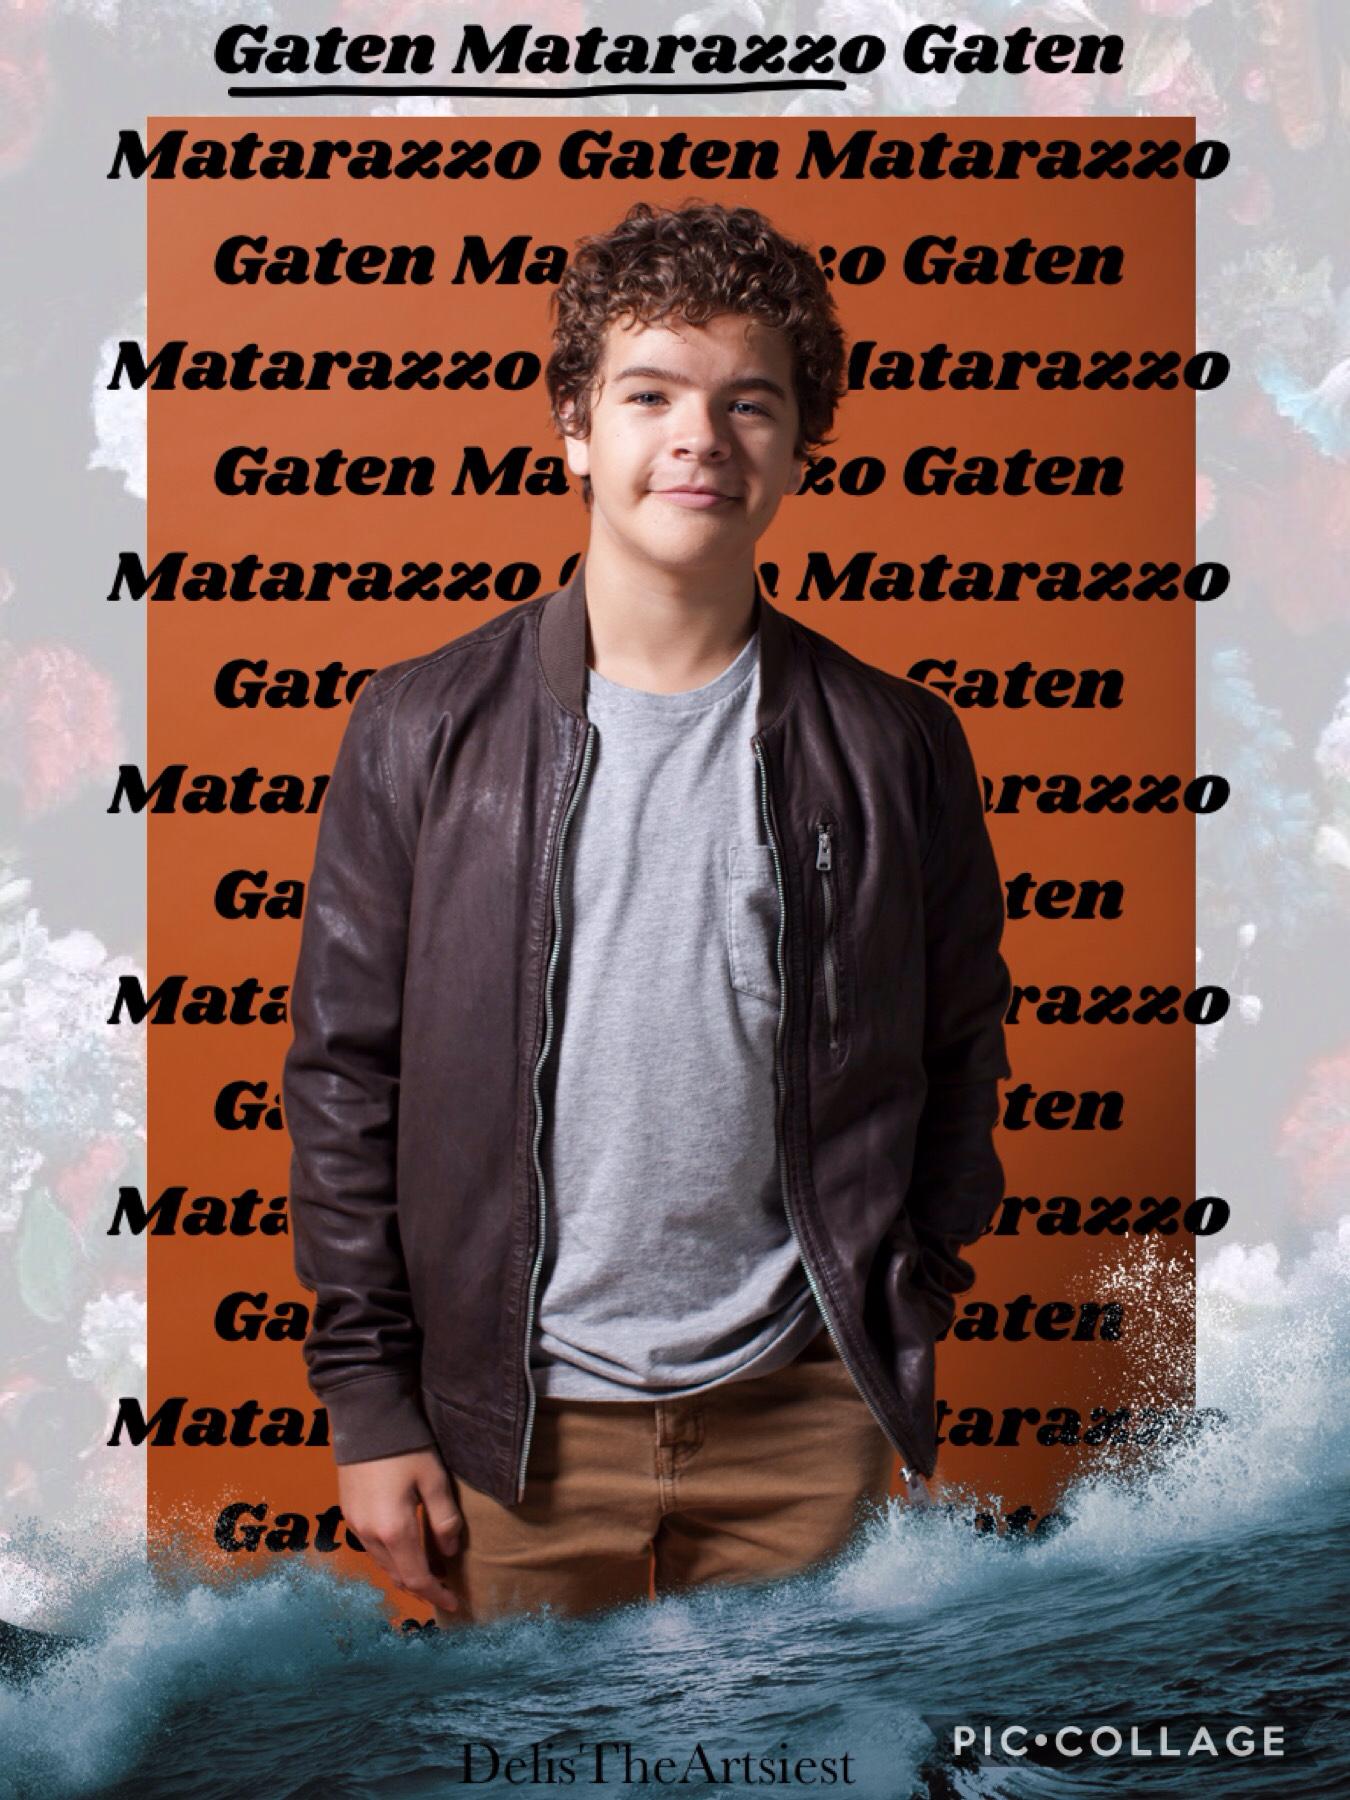 ✨TAPPY TAP TAPPO✨
Gaten is literally perfect, like what
💫
Basically the Stranger Things cast is the only thing that makes me happy
💫
Annnnd.... I feel like I'm going to throw up. Yay